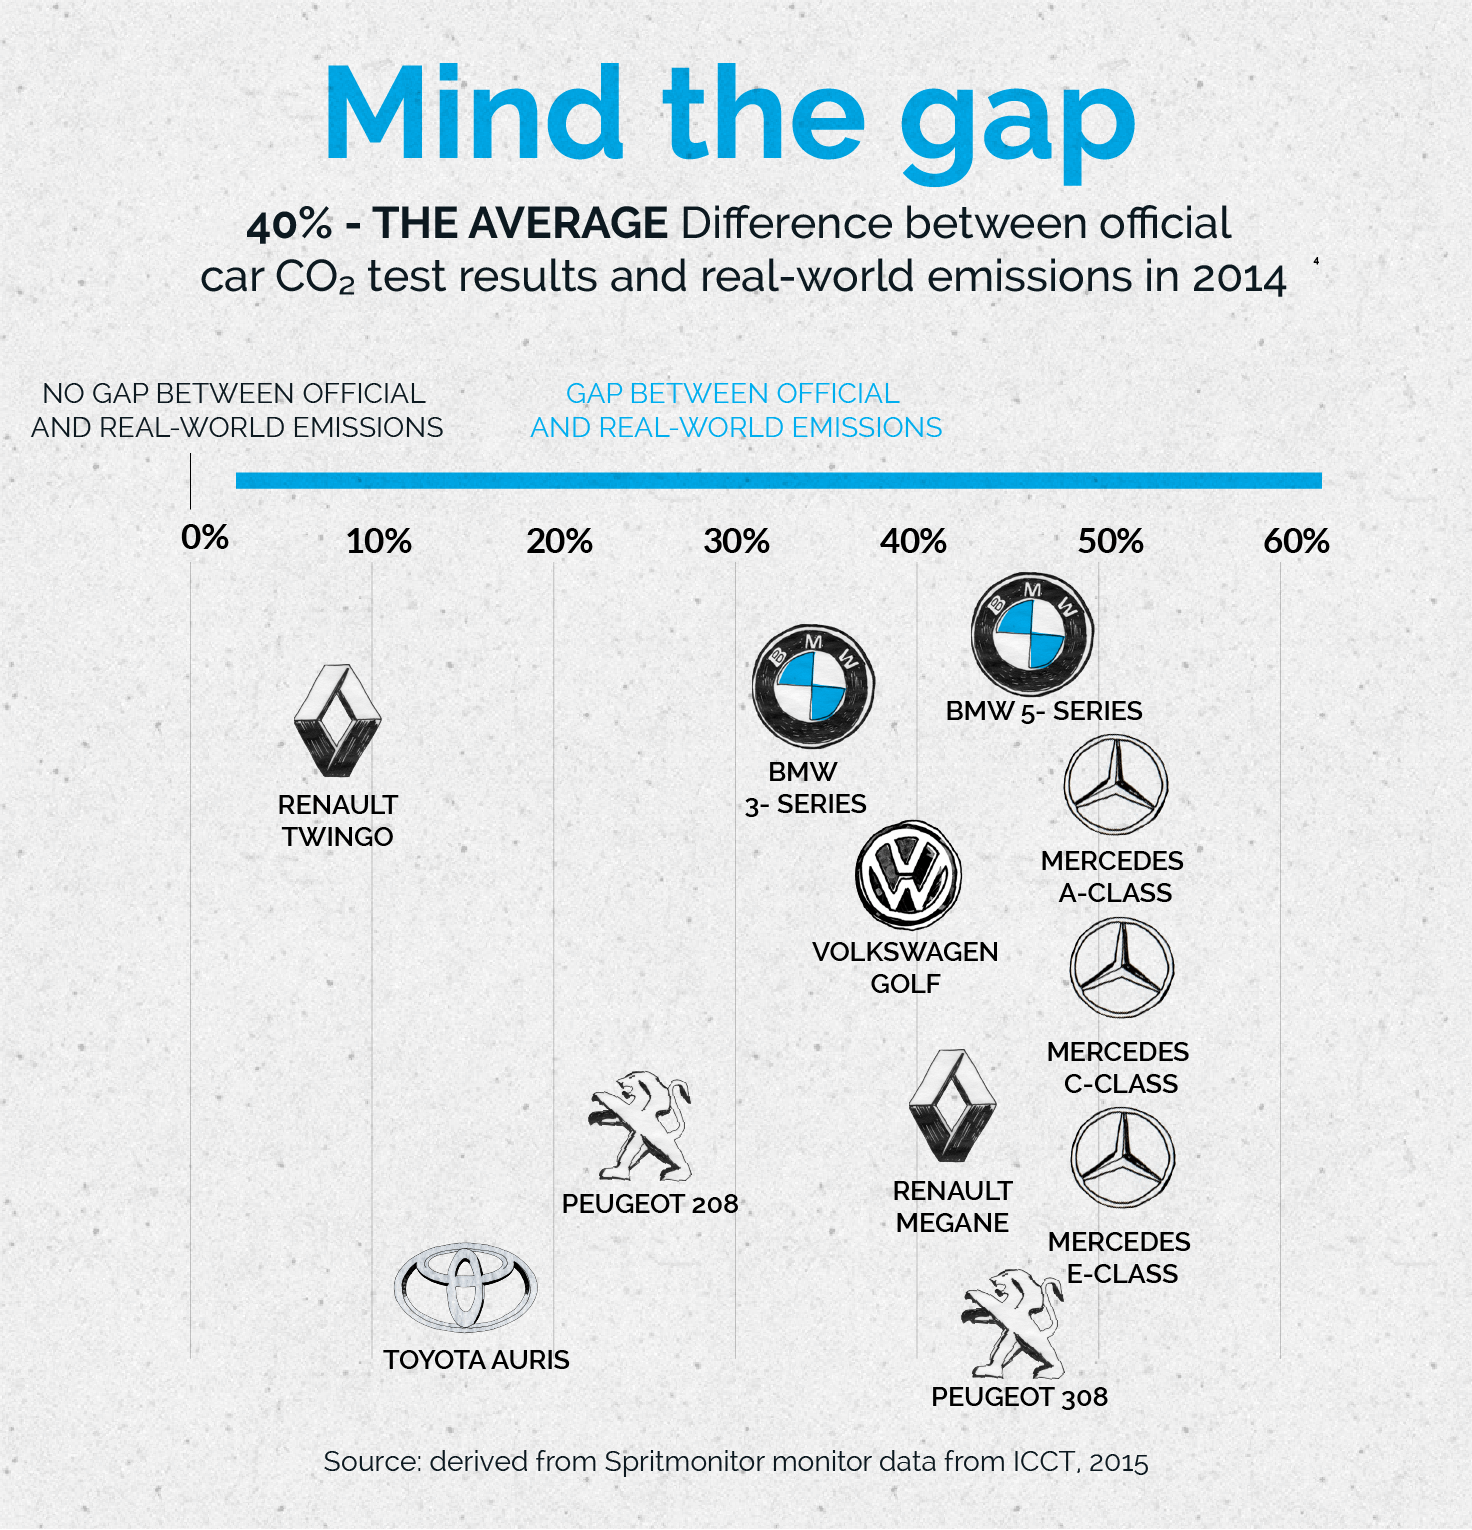 40% – the average gap between official and real-world CO2